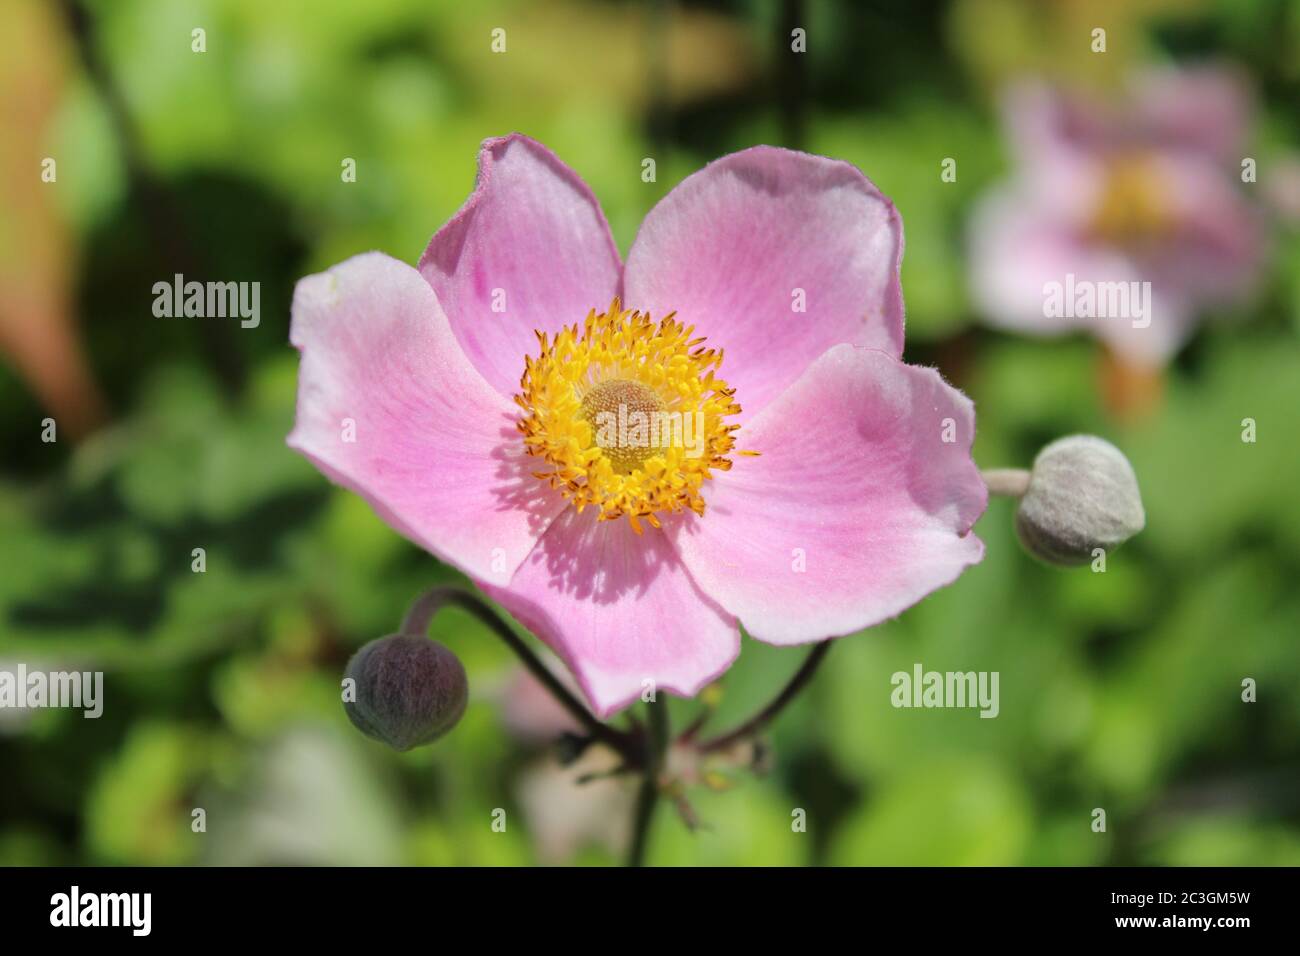 Closeup shot of a Japanese anemone with blurred background Stock Photo